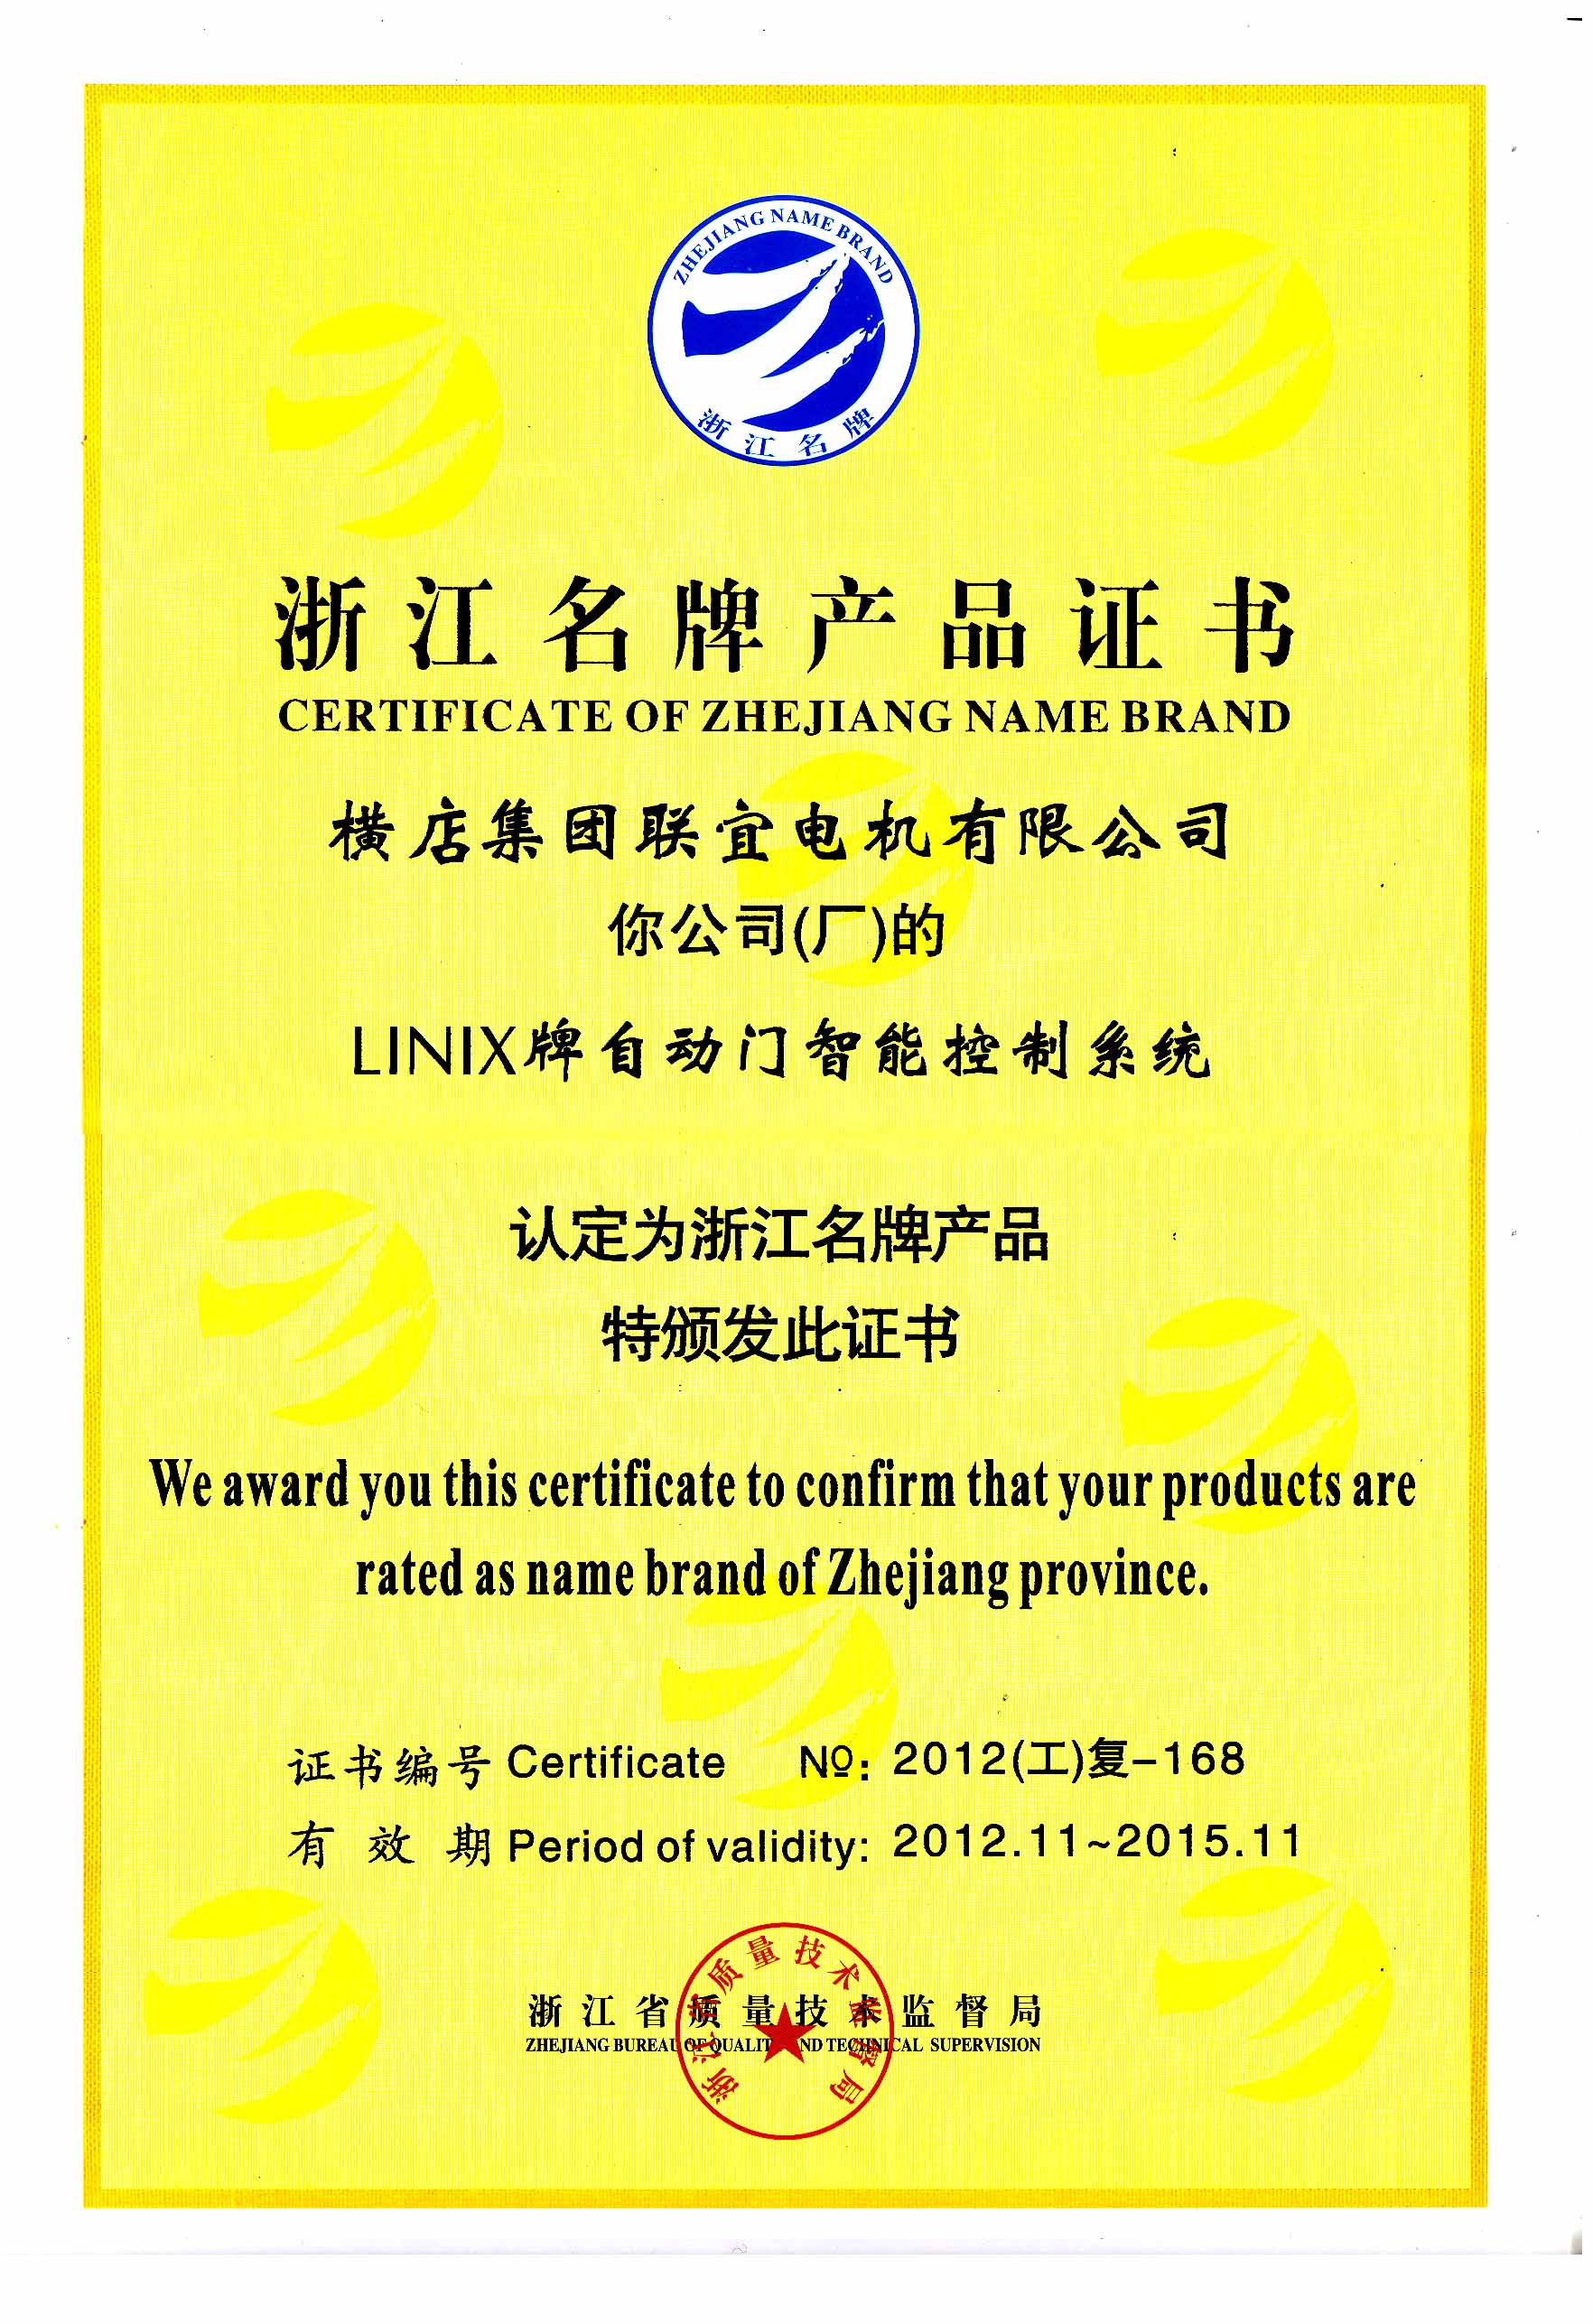 Zhejiang famous brand product certificate - linix automatic door intelligent control system